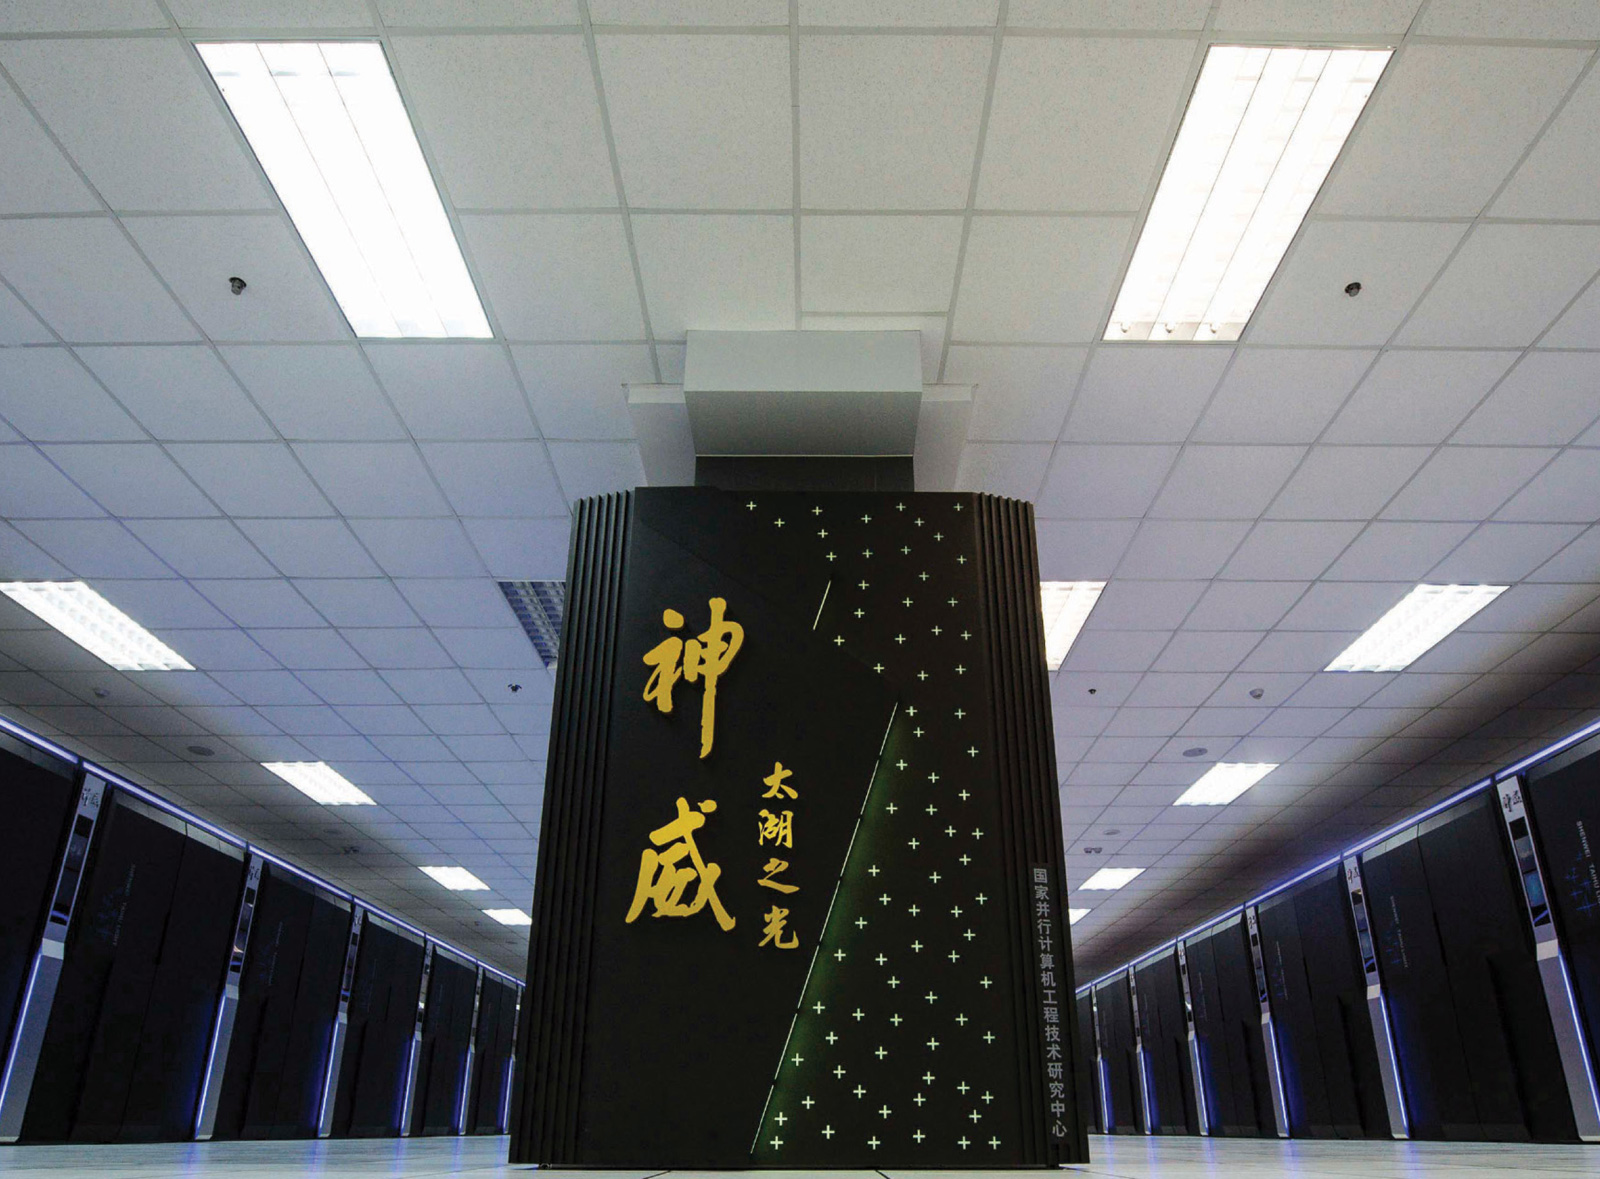 A photograph of the Sunway TaihuLight supercomputer located at the National Supercomputing Center in Wuxi, China.